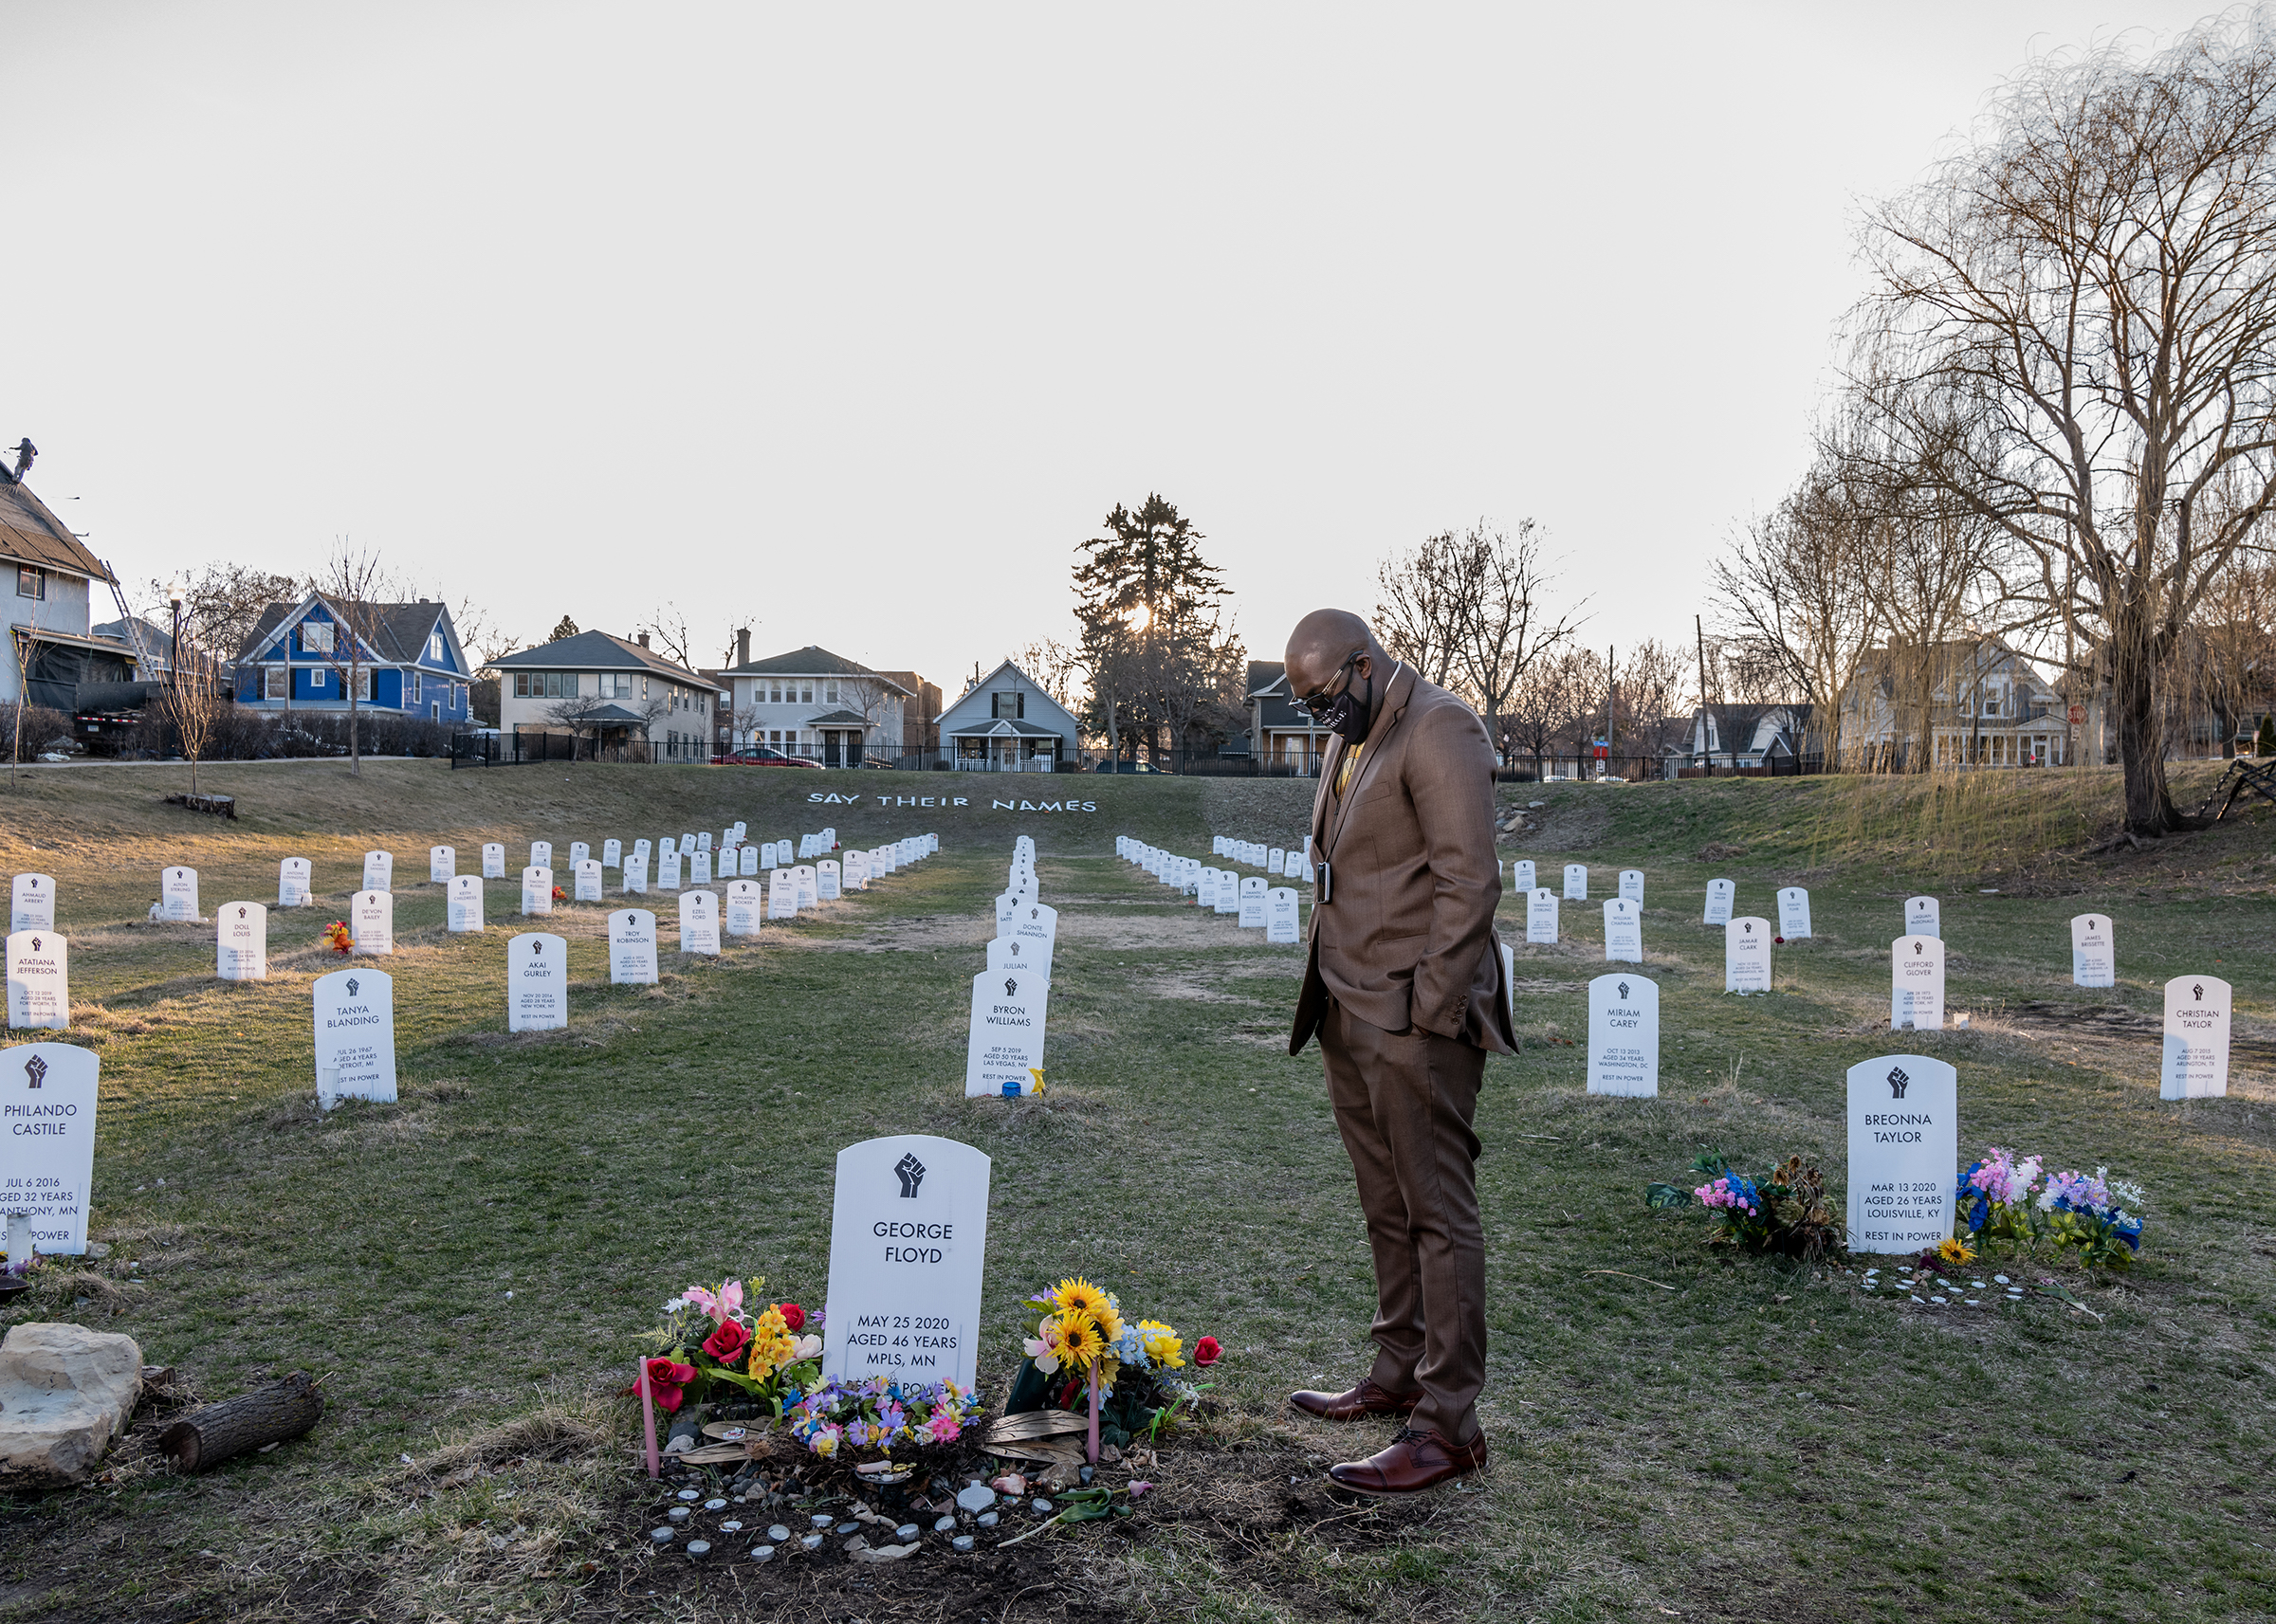 George Floyd's brother, Philonise Floyd, visits a protest art installation on April 1. The tombstones bear the name of Black Americans lynched by private citizens, fatally shot, or choked by police officers or other victims who died in police custody. Former Minneapolis police officer Derek Chauvin was convicted on April 20 of murdering George Floyd—a <a href="https://time.com/6075908/derek-chauvin-sentence/">historic moment</a> for the racial justice movement in a nation where law enforcement officers are rarely found guilty of killing civilians. In June, Chauvin was sentenced to 22.5 years in prison. (Ruddy Roye for TIME)